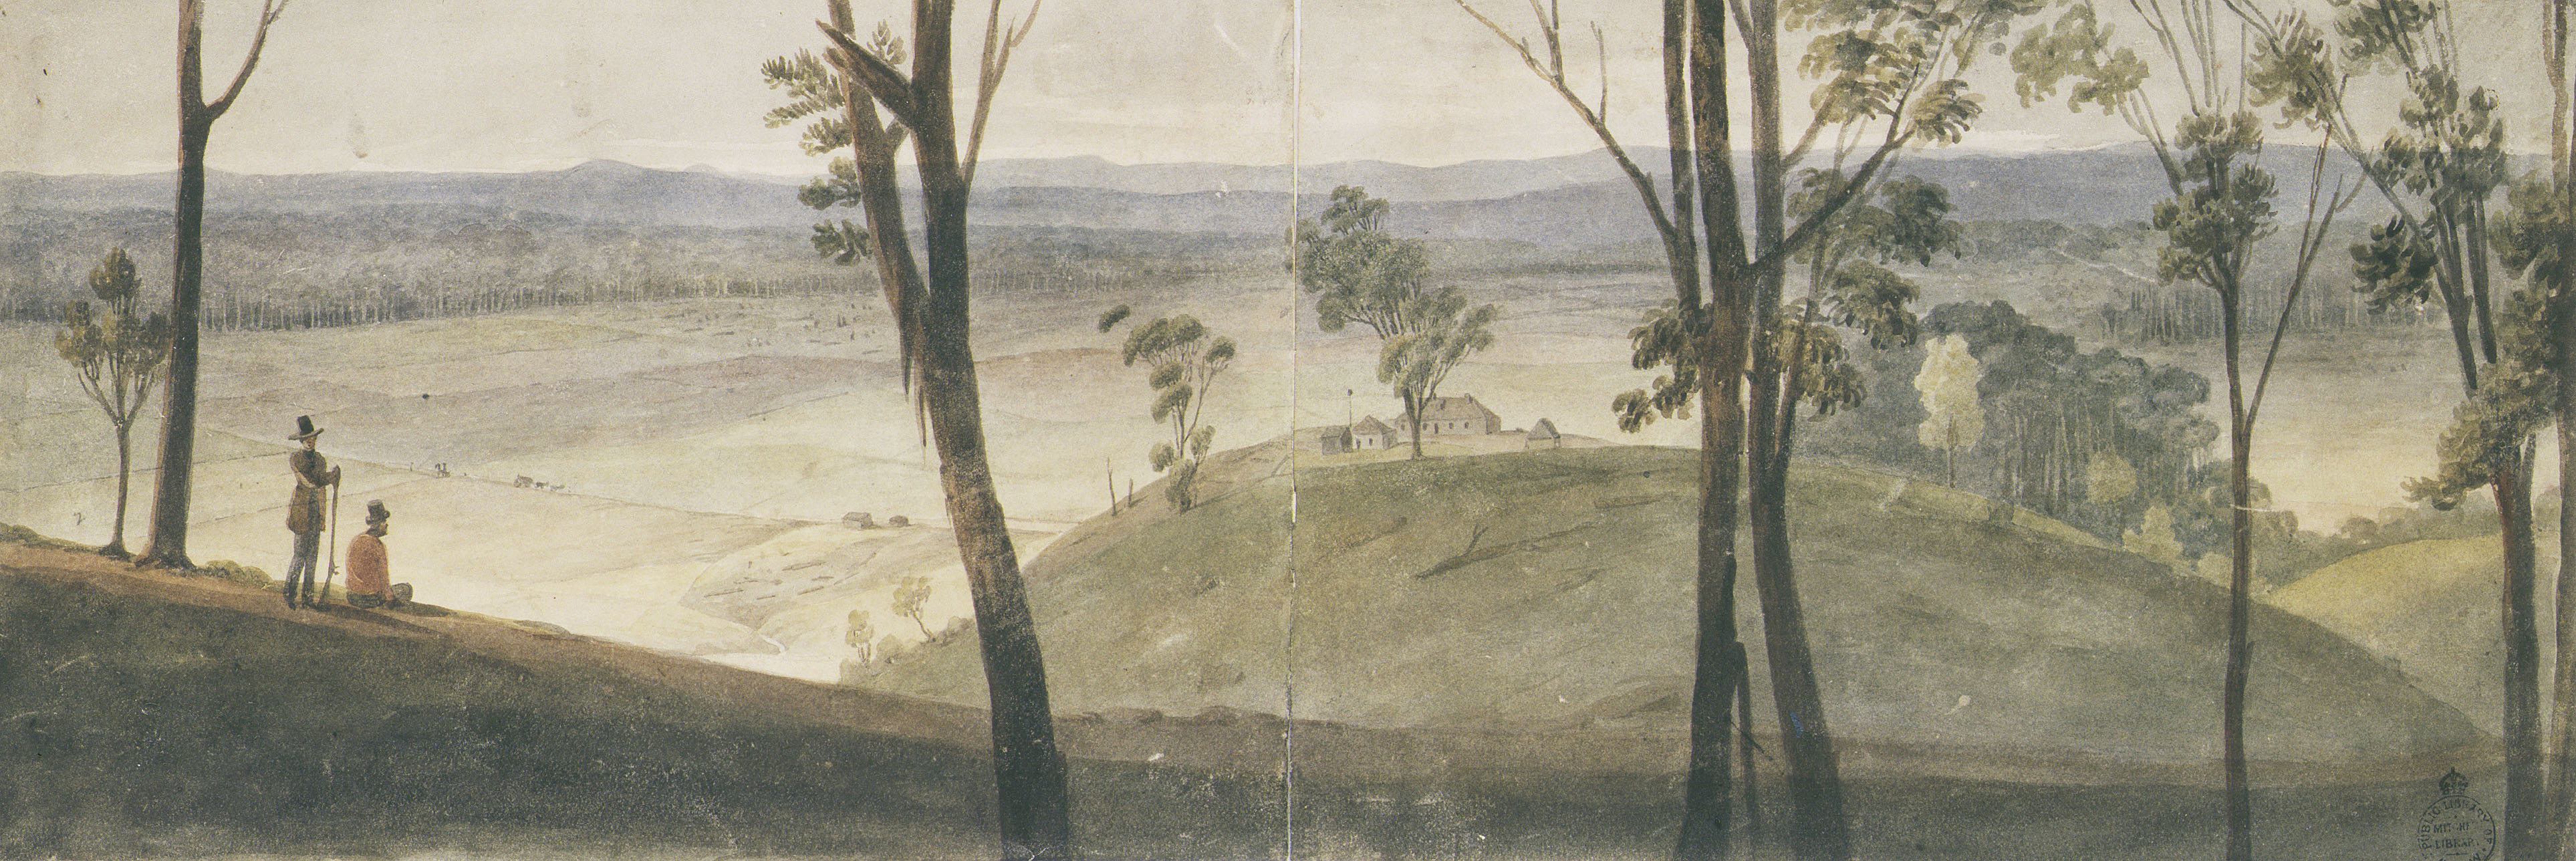 A drawing of two men in top hats surveying the landscape beyond them.